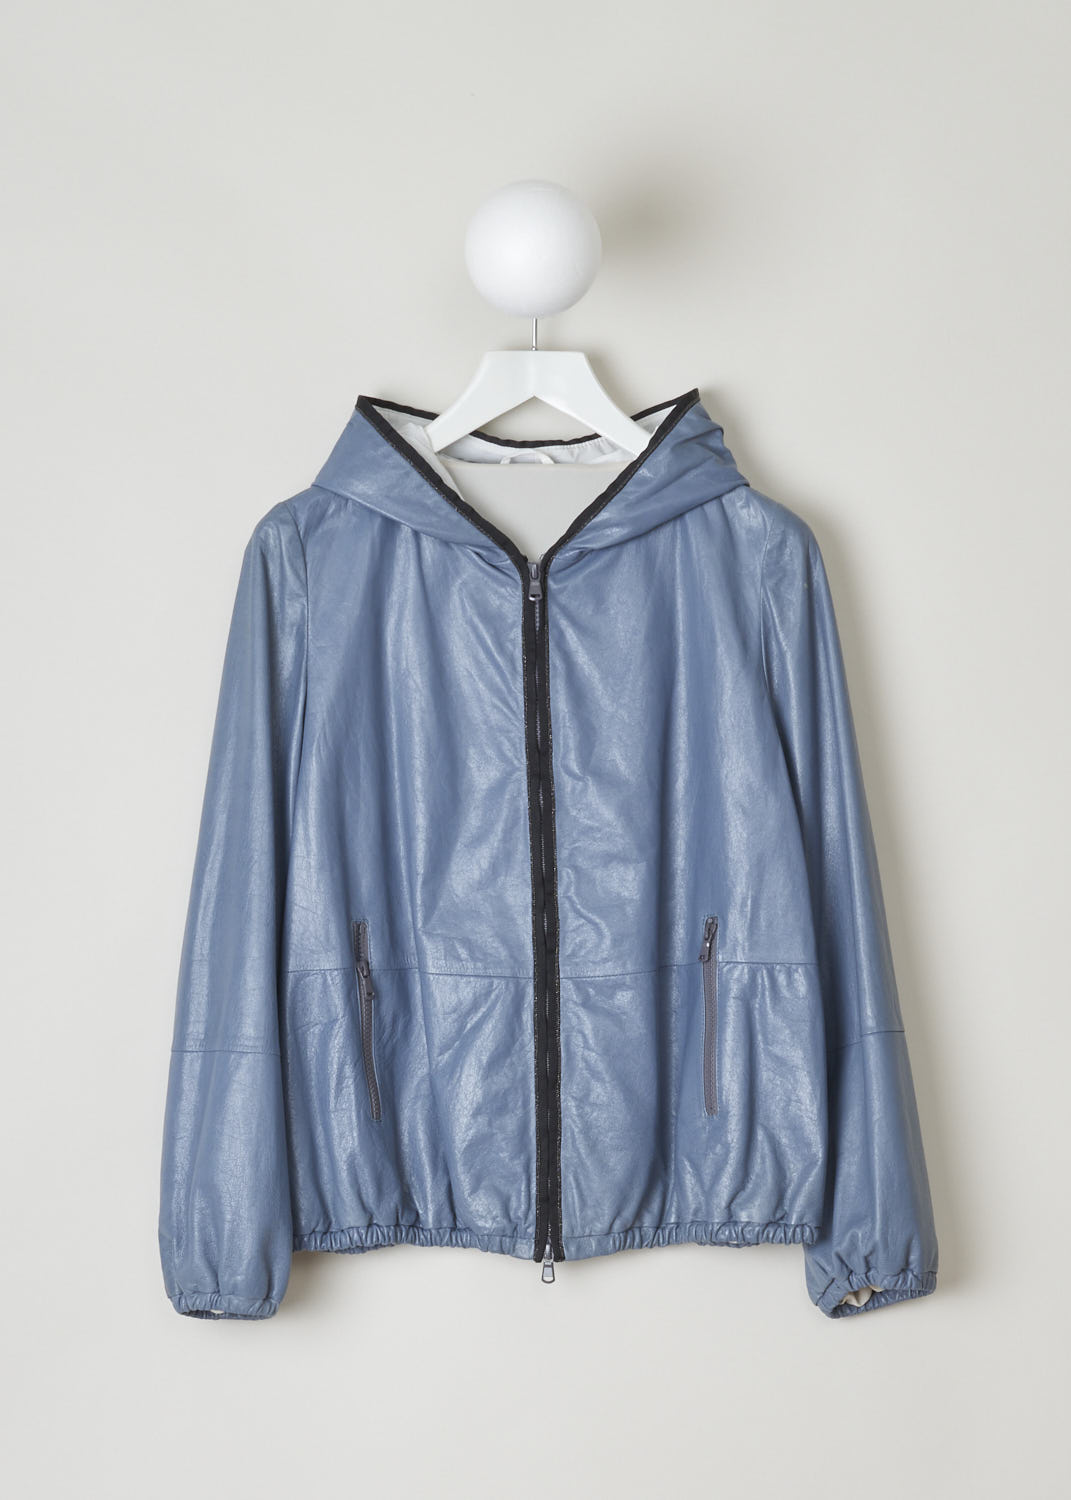 BRUNELLO CUCINELLI, HOODED LEATHER JACKET WITH EMBELLISHMENTS, MPBIS8276_C6173, Blue, Grey, Front, This sporty leather jacket features a hood with a subtle bejeweled trim that extends down along the zipper. The cuffs and the hem have an elastic band, cinching them in. Two welt pockets with zippers can be found on the front of the jacket. 
